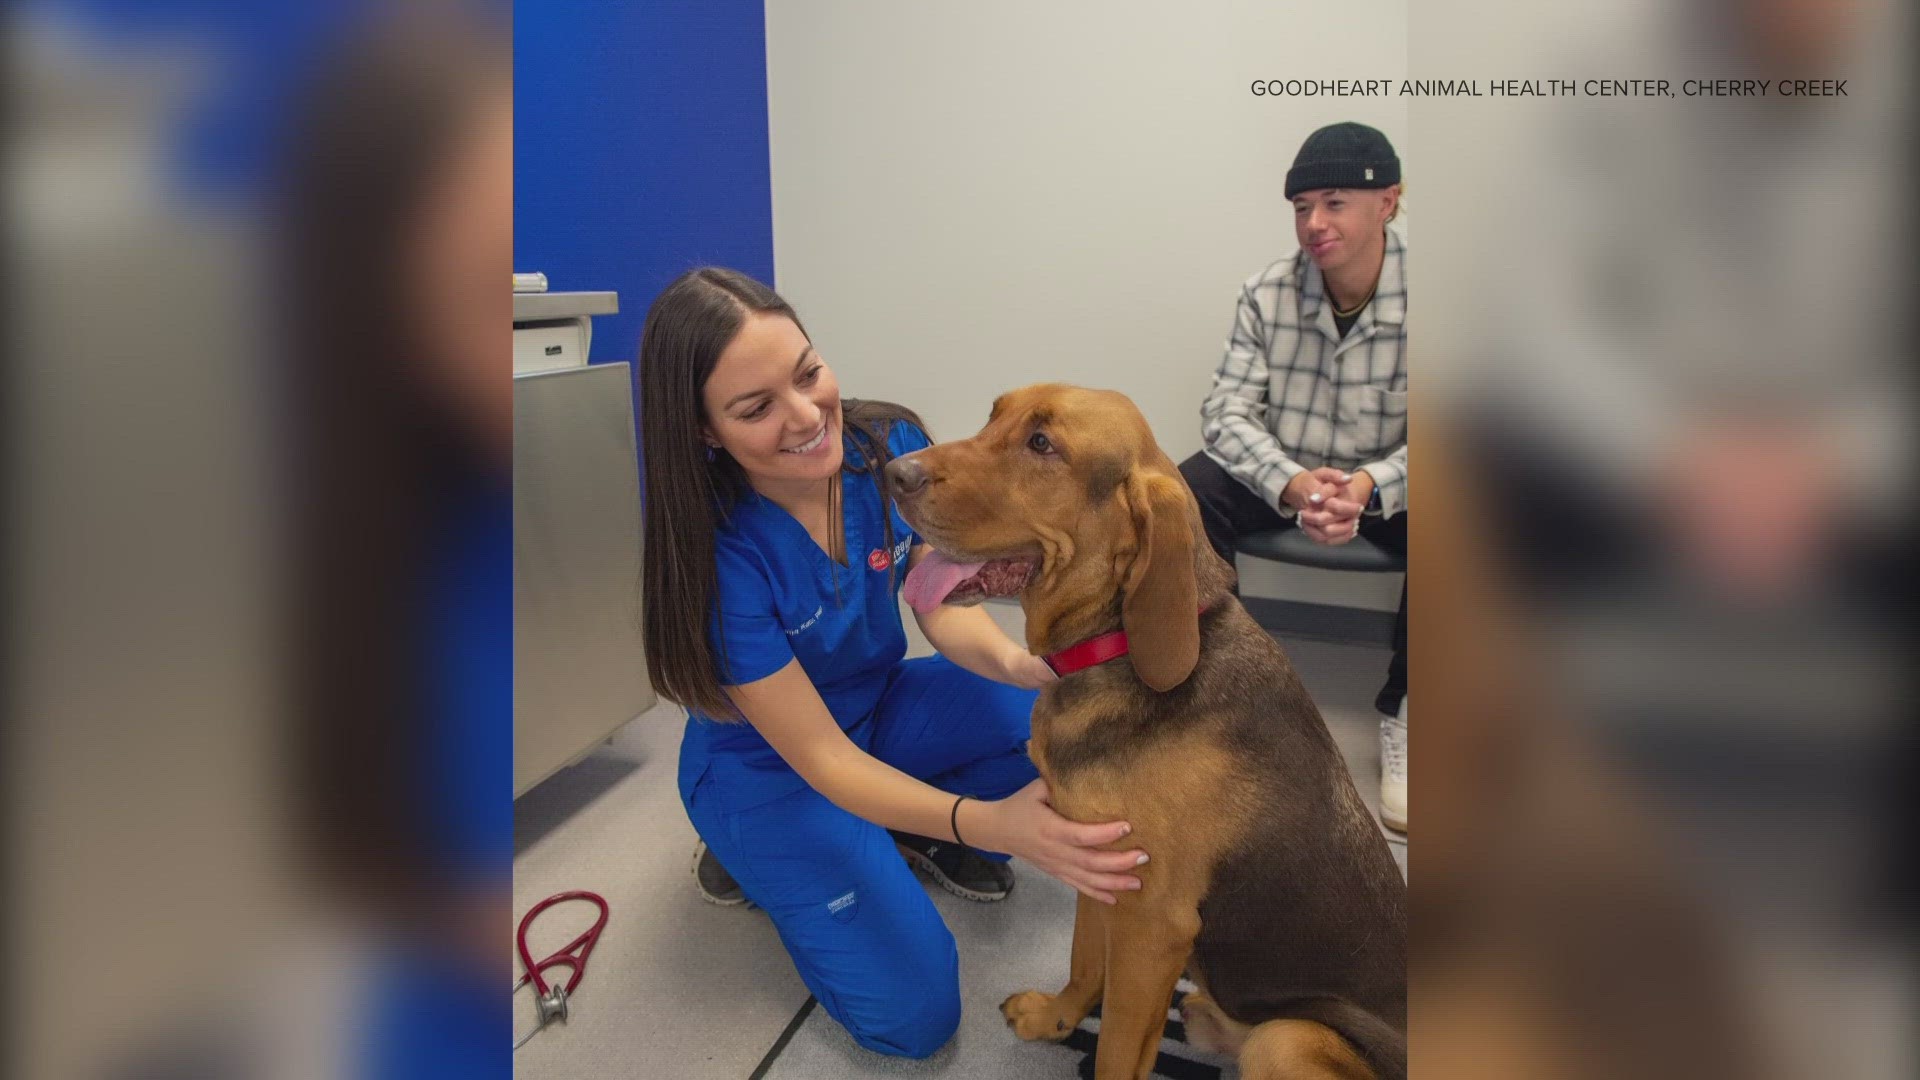 Veterinarians are seeing more cases of coughing and respiratory disease in dogs. Dr. Alexander Robb from Goodheart Animal Health Center in Cherry Creek explains.